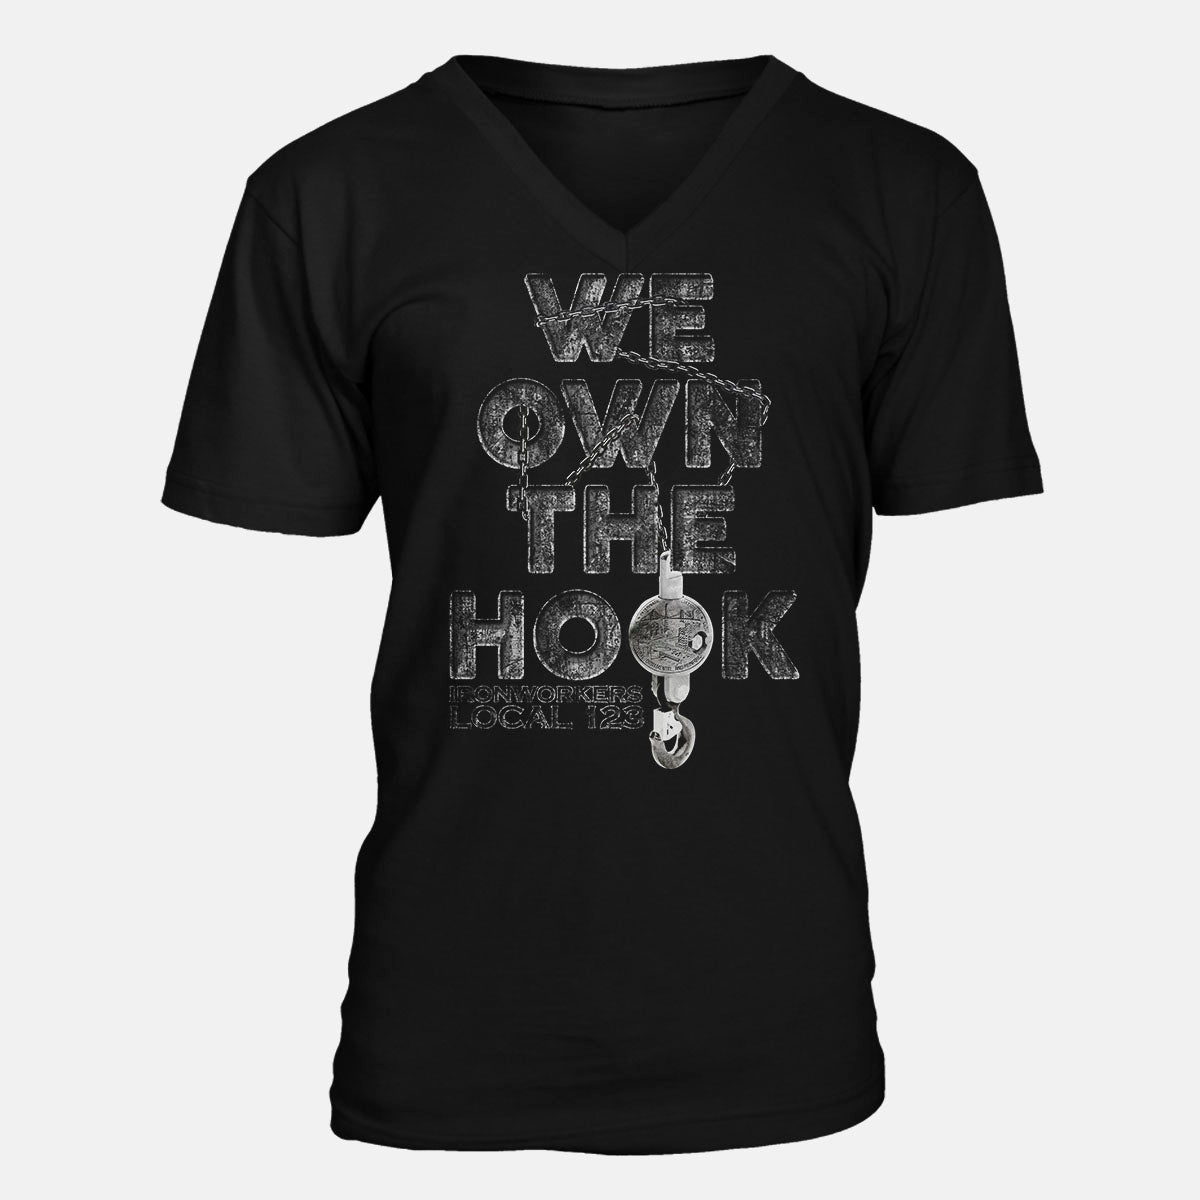 Ironworkers Hook Union Apparel